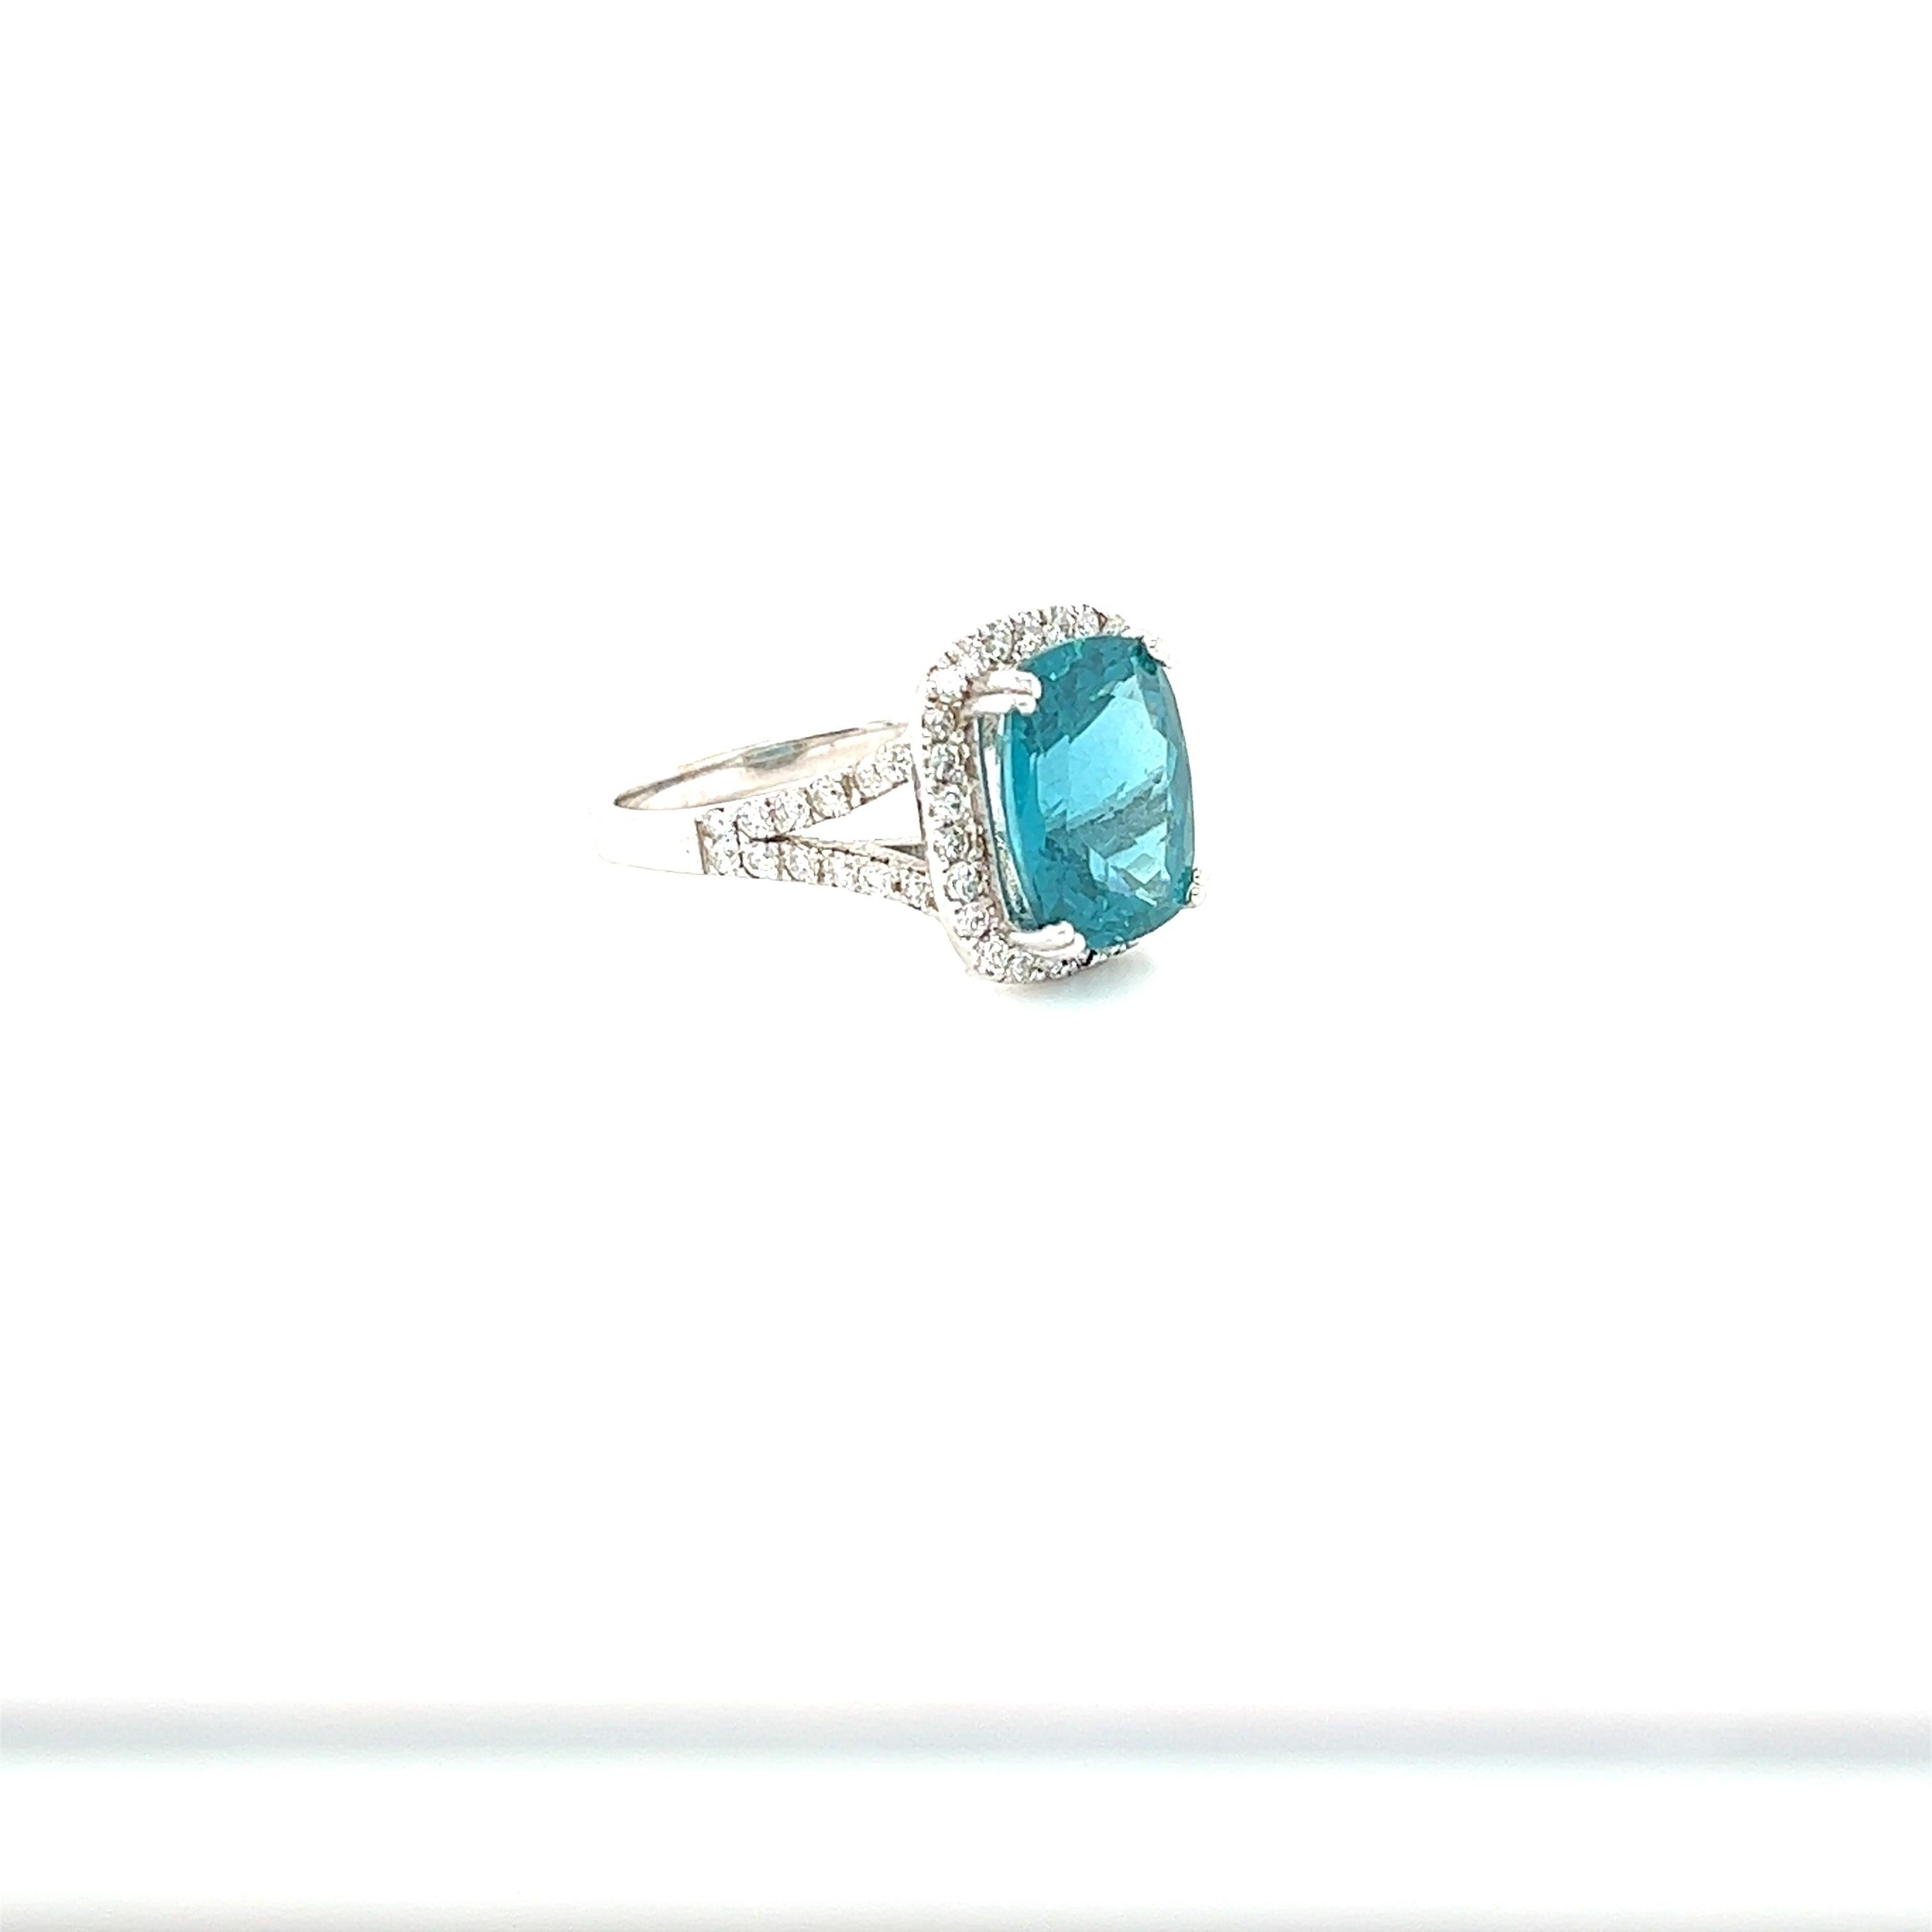 This ring has a Natural Cushion Oval Cut Apatite that weighs 4.75 Carats and has 50 Round Cut Diamonds that weigh 0.67 Carats. The total carat weight of the ring is 5.42 Carats. 
The clarity and color of the diamonds are SI-F. 

The ring is set in